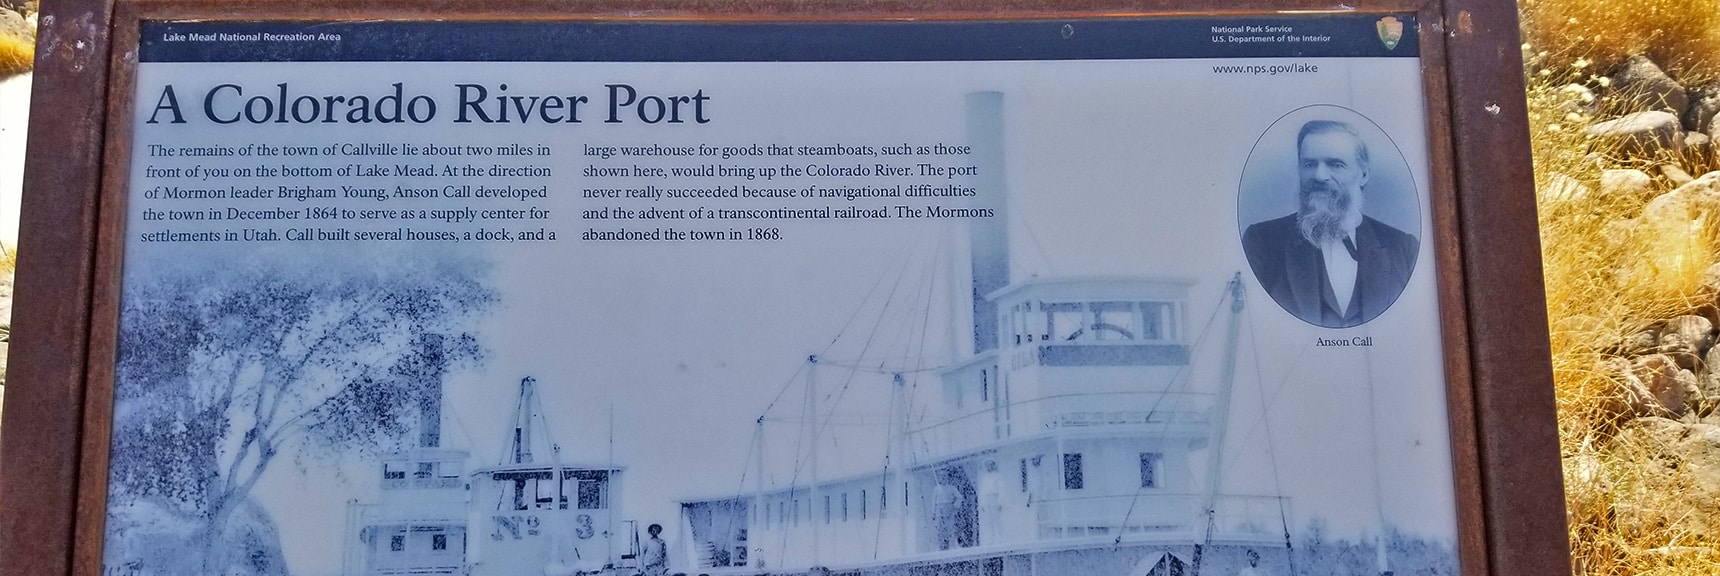 Interpretive Display of Old Colorado River Port at Callville Bay | Callville Summit Trail | Lake Mead National Recreation Area, Nevada